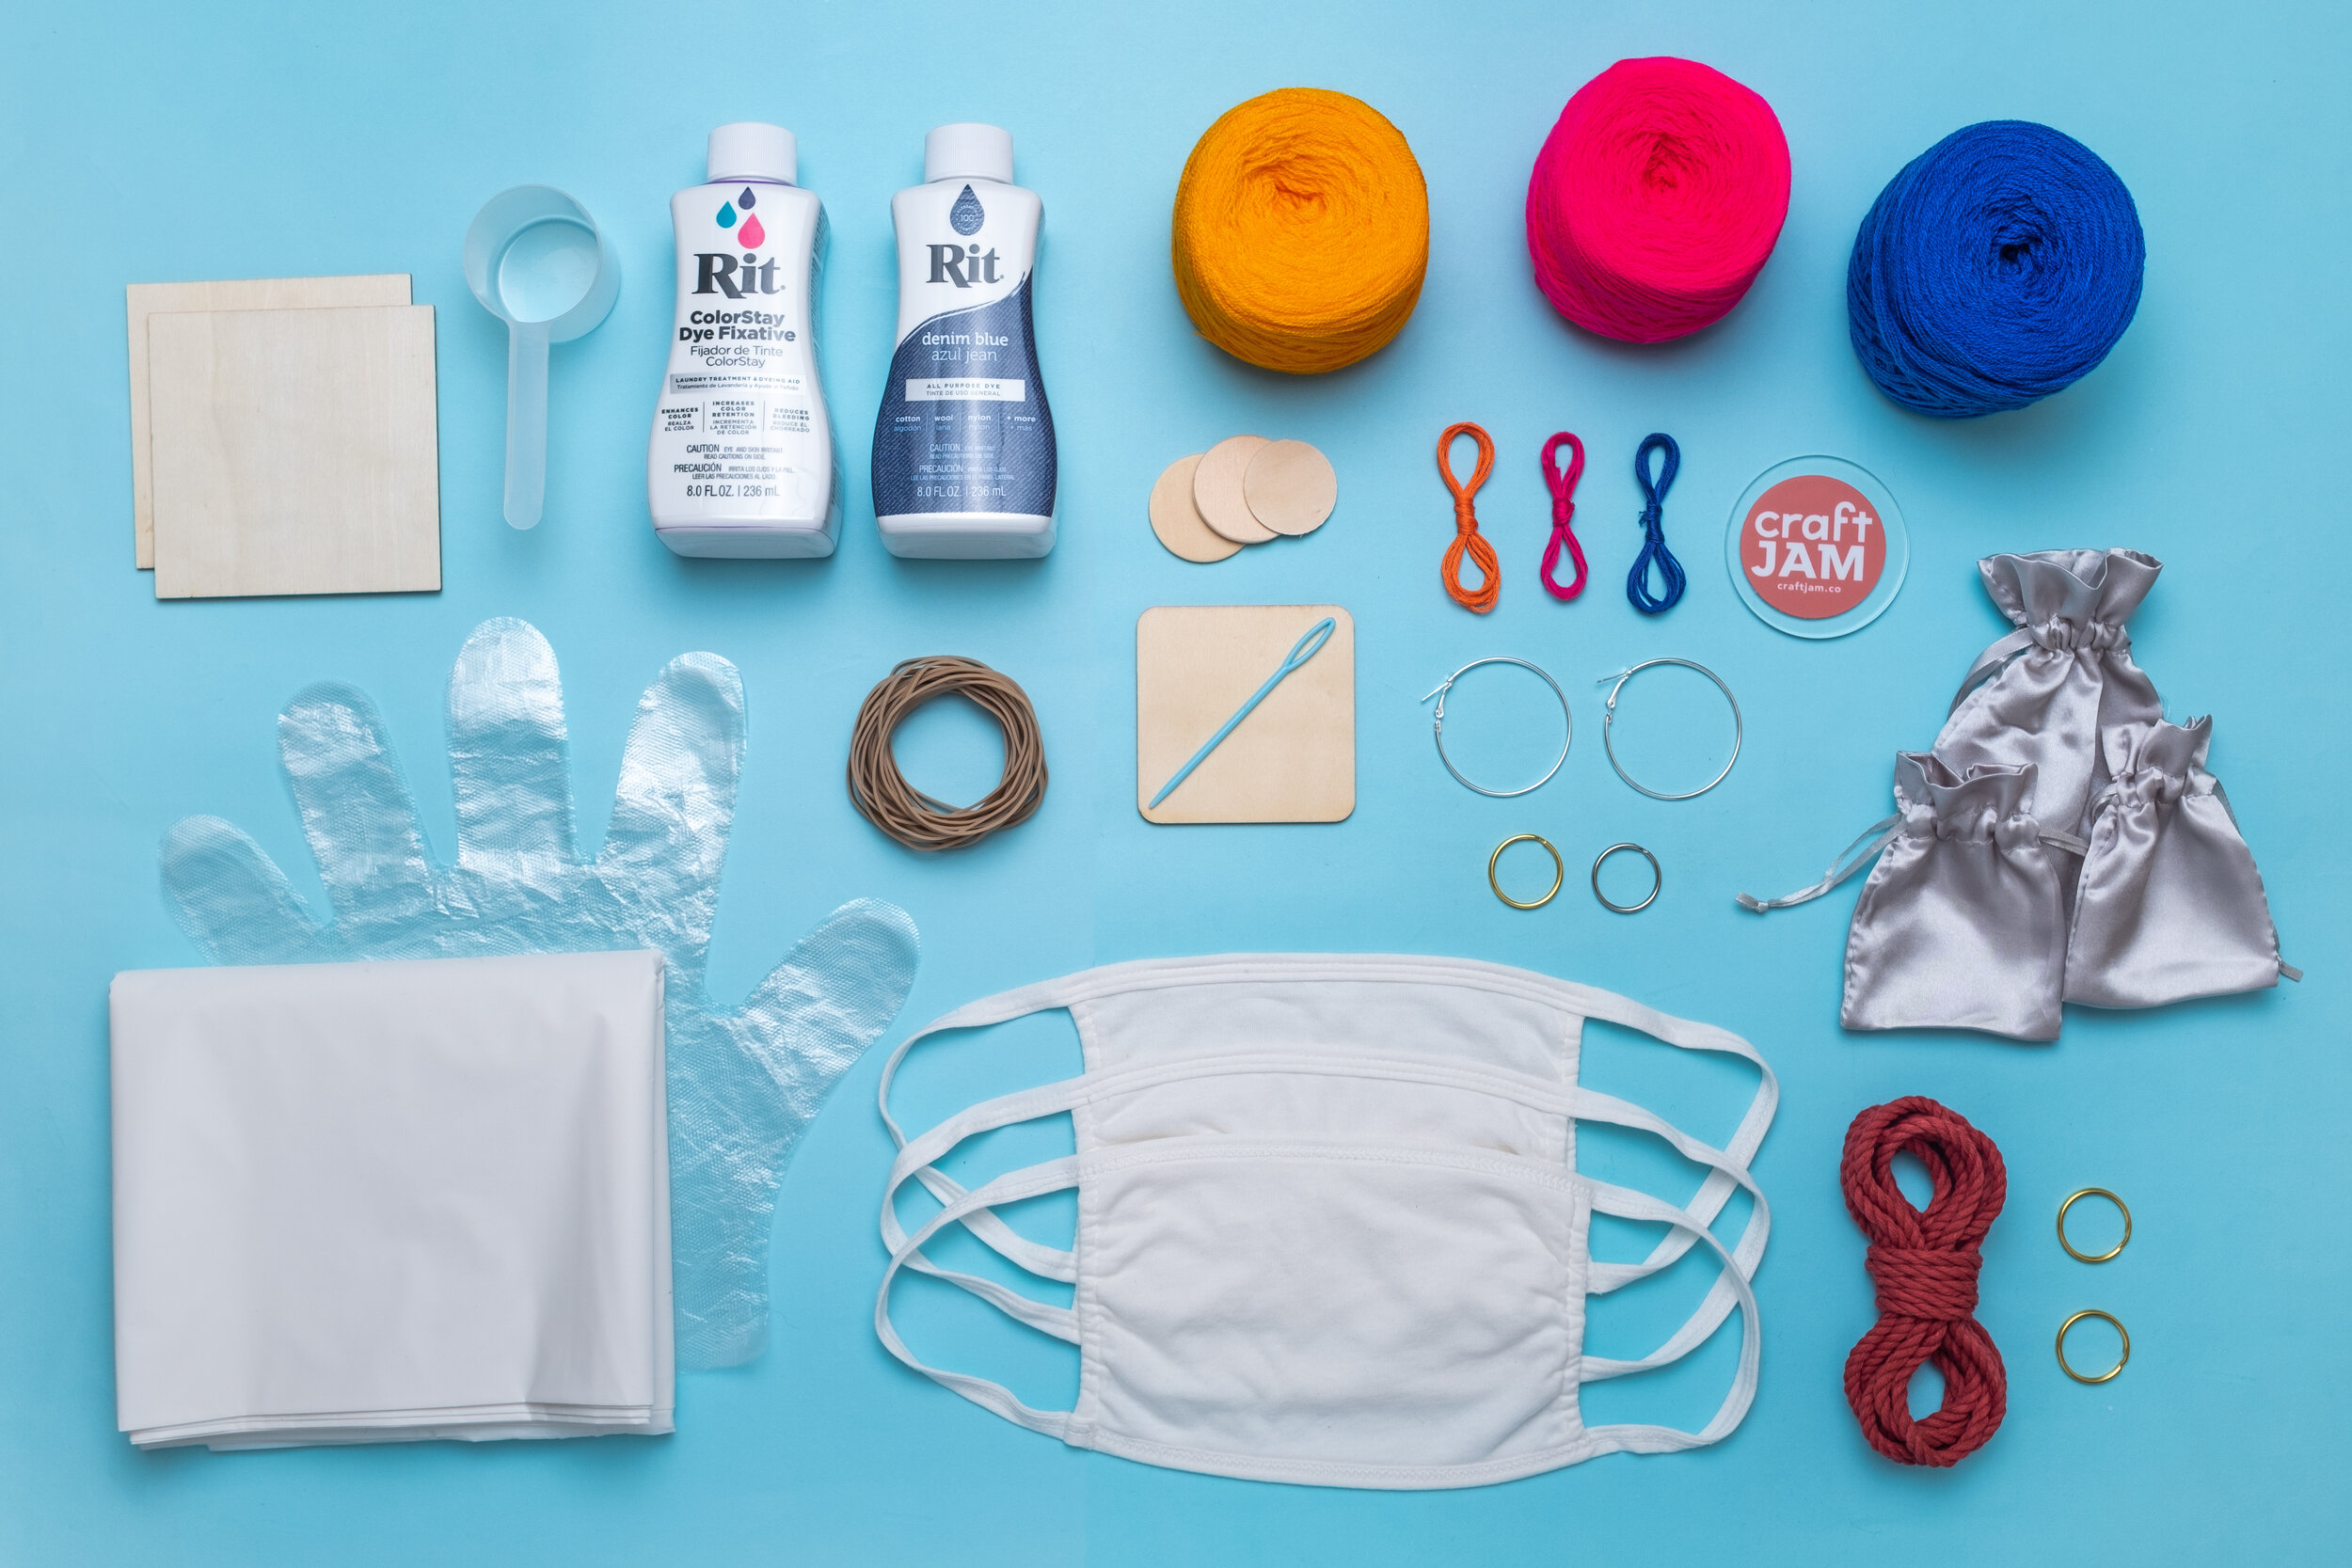 Only post-COVID: The kit for our very popular mask tie dye workshop. Photo: Izzy Dow for CraftJam (Photo: Izzy Dow for CraftJam)